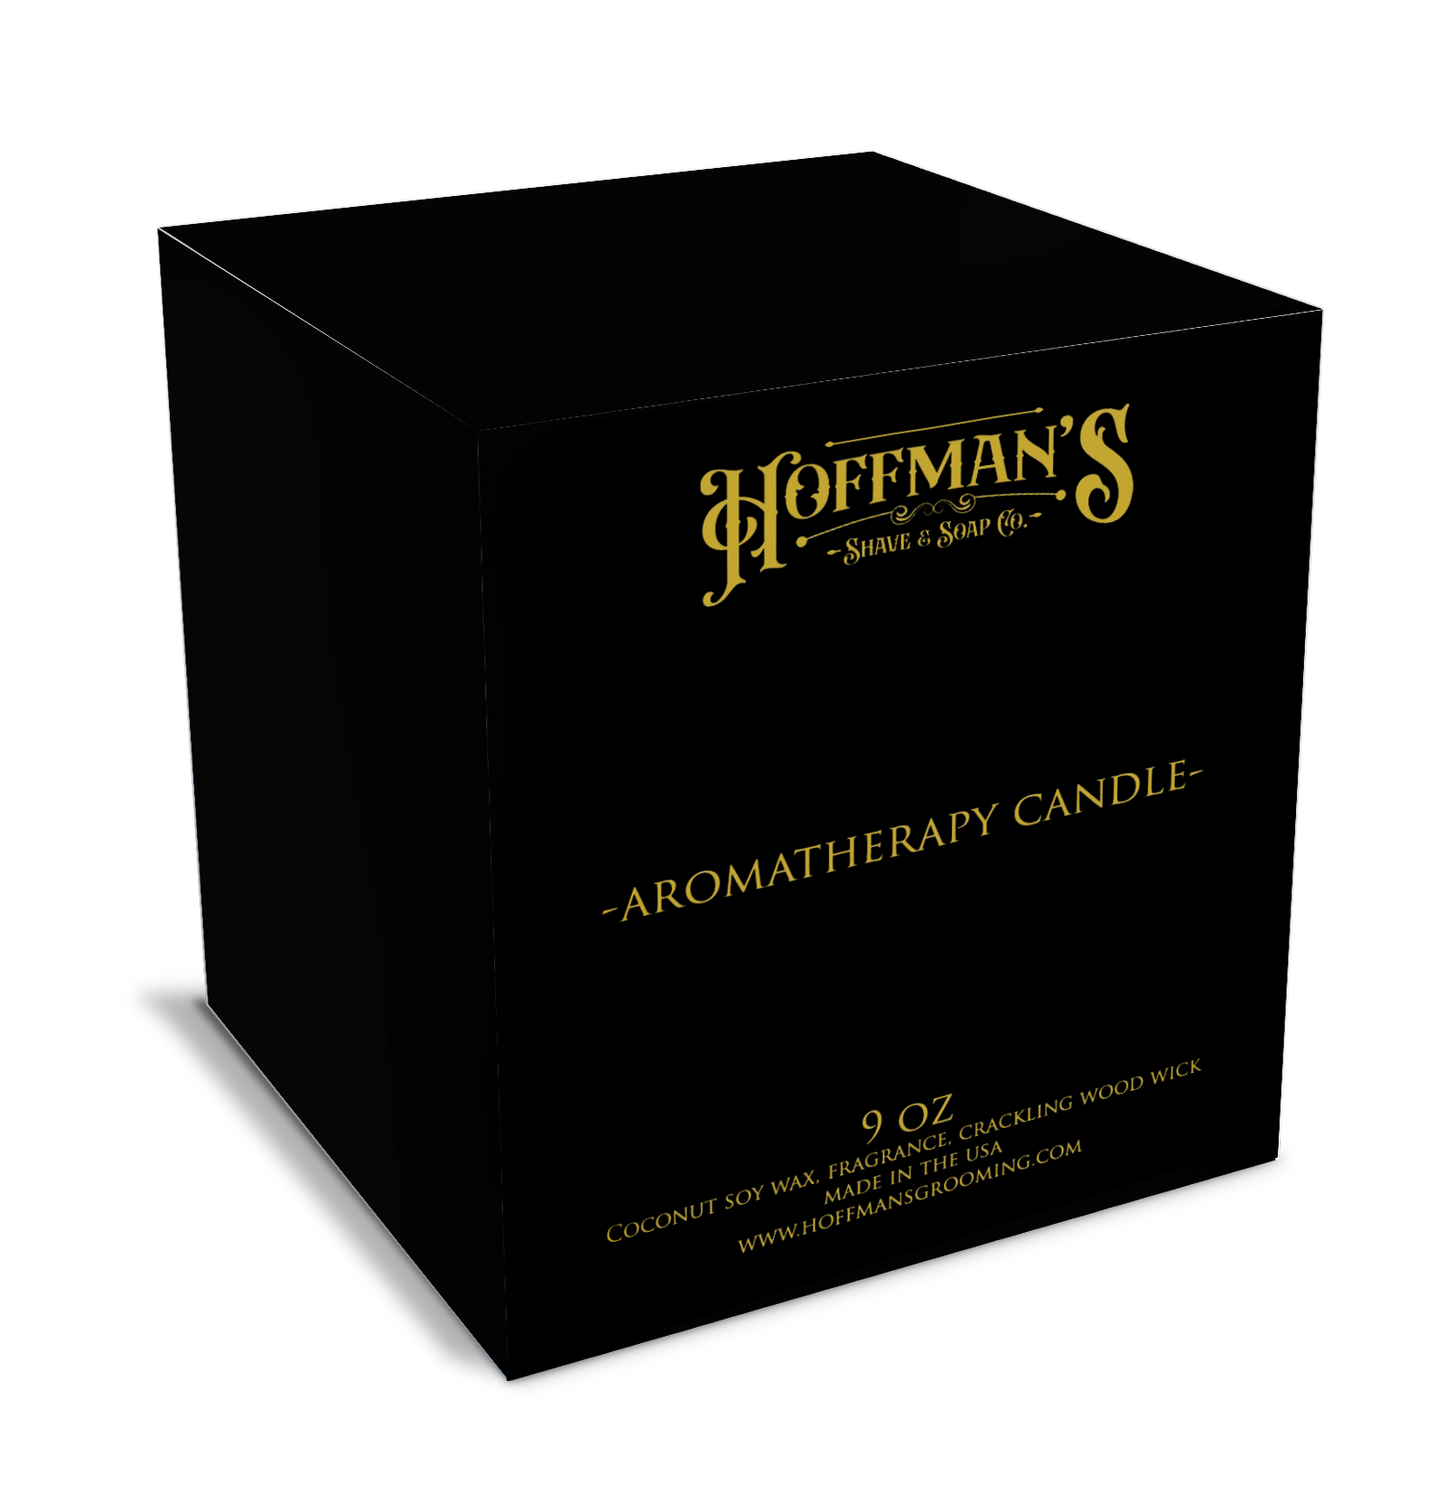 Dead Hollow 9oz Aromatherapy Candle